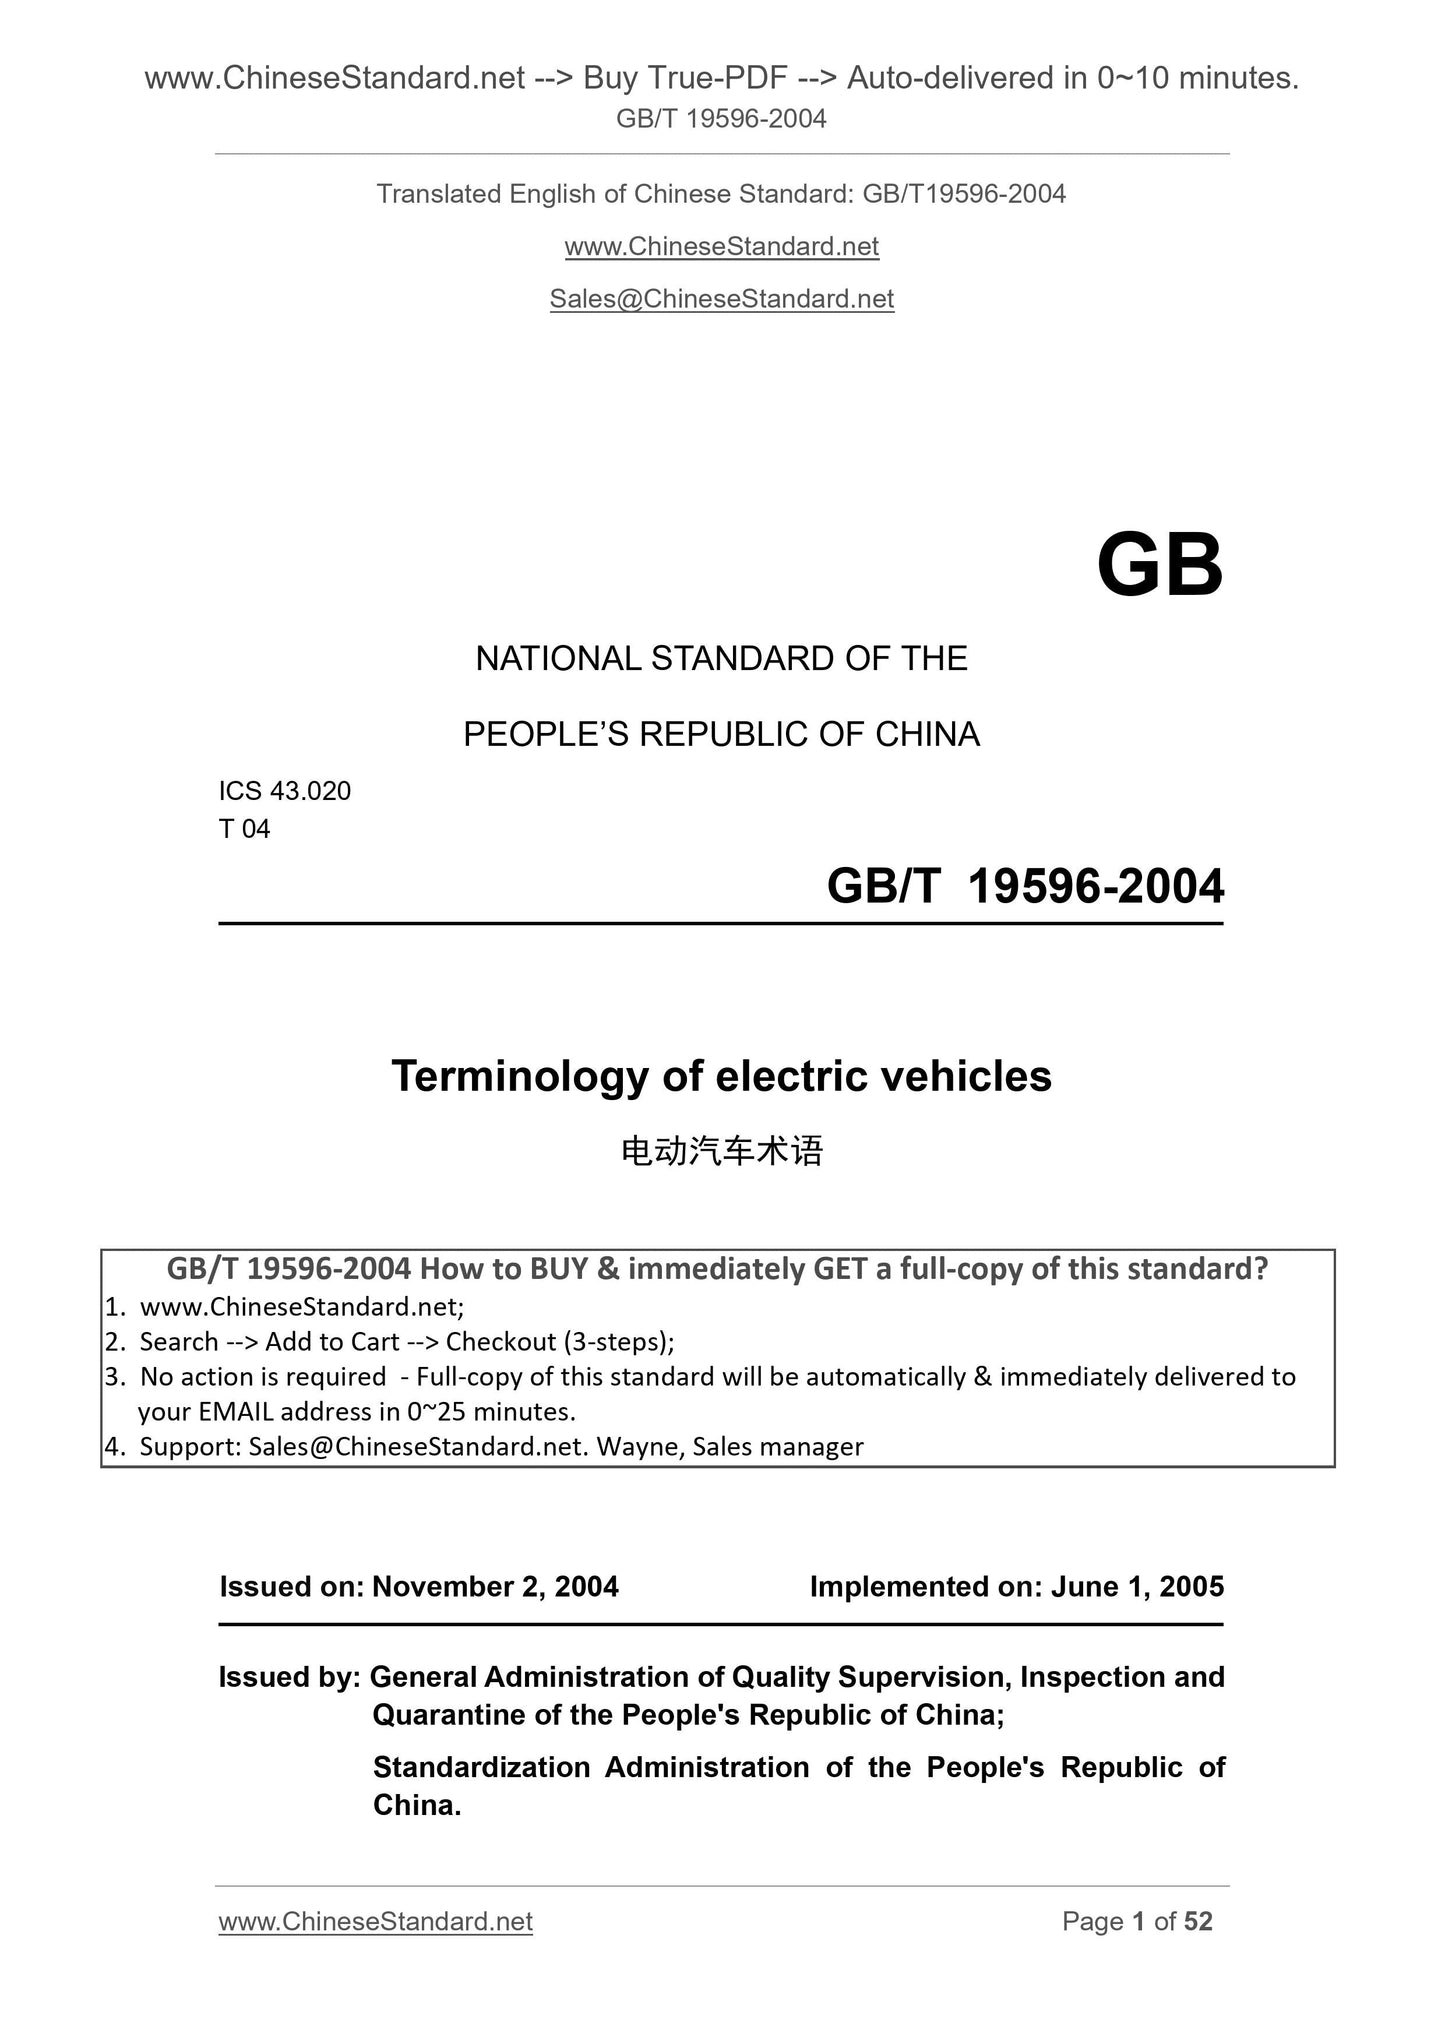 GB/T 19596-2004 Page 1